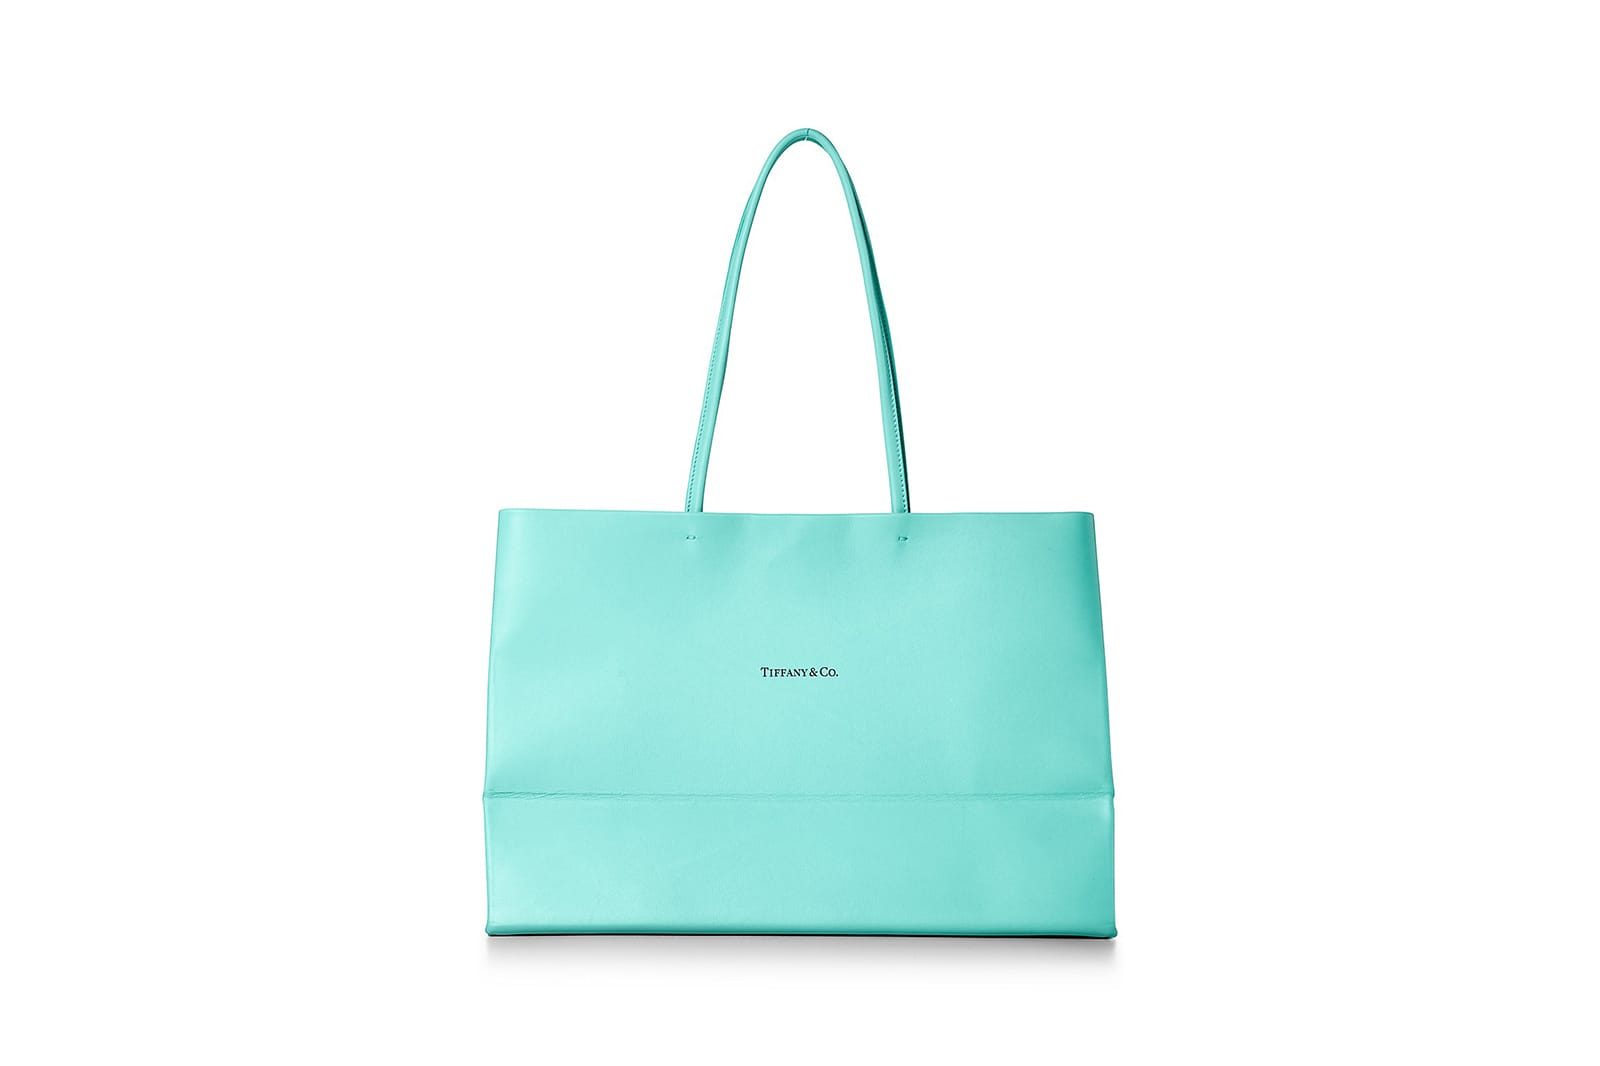 Tiffany & Co. Leather Tote Shopping Bag | HYPEBEAST